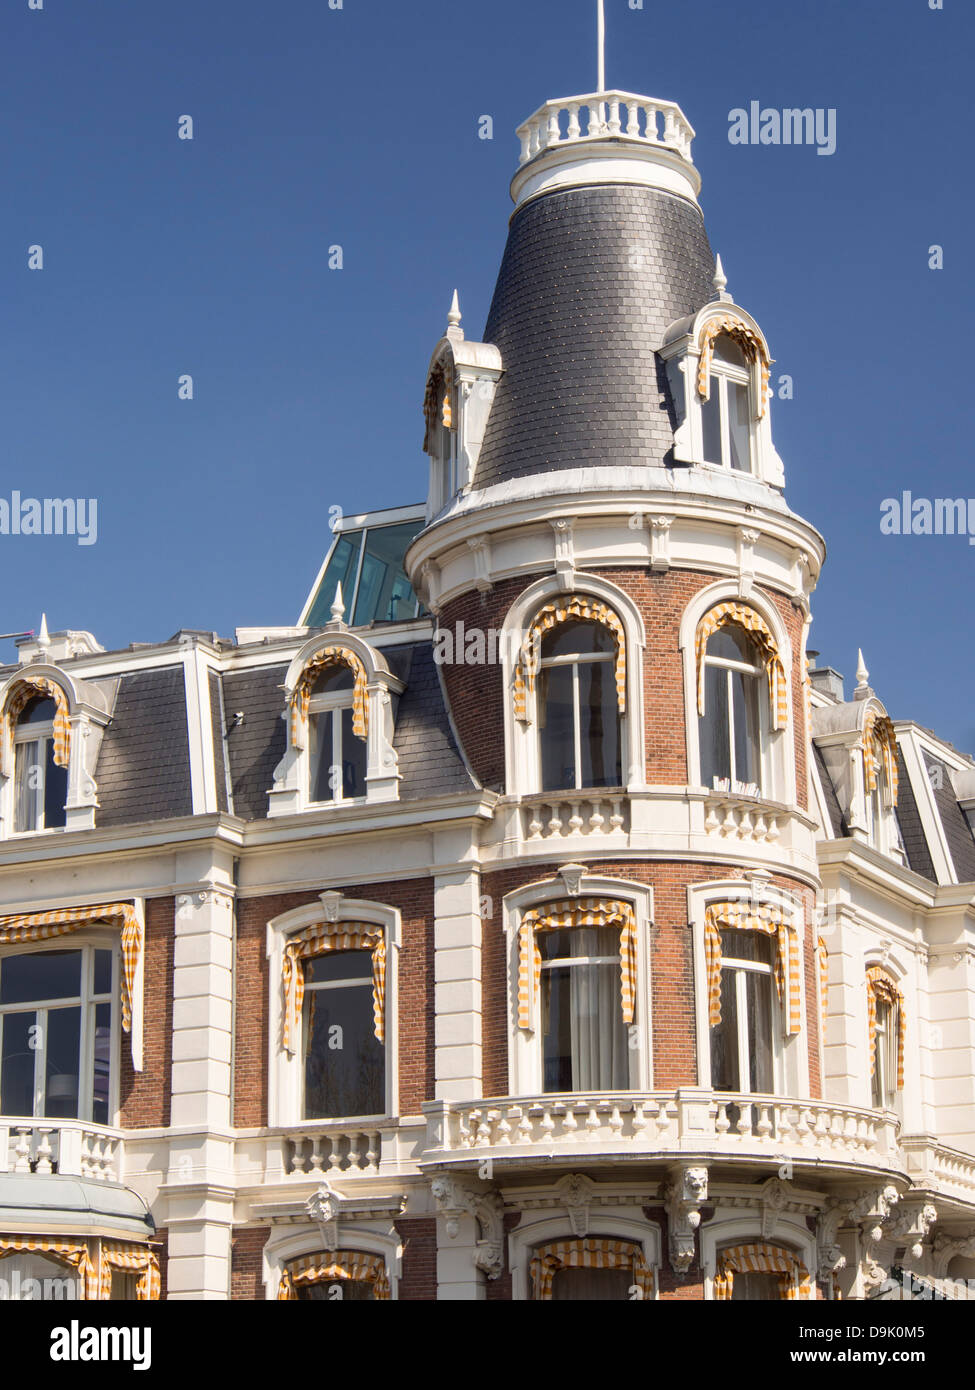 A house with a tower in Amsterdam, Netherlands. Stock Photo